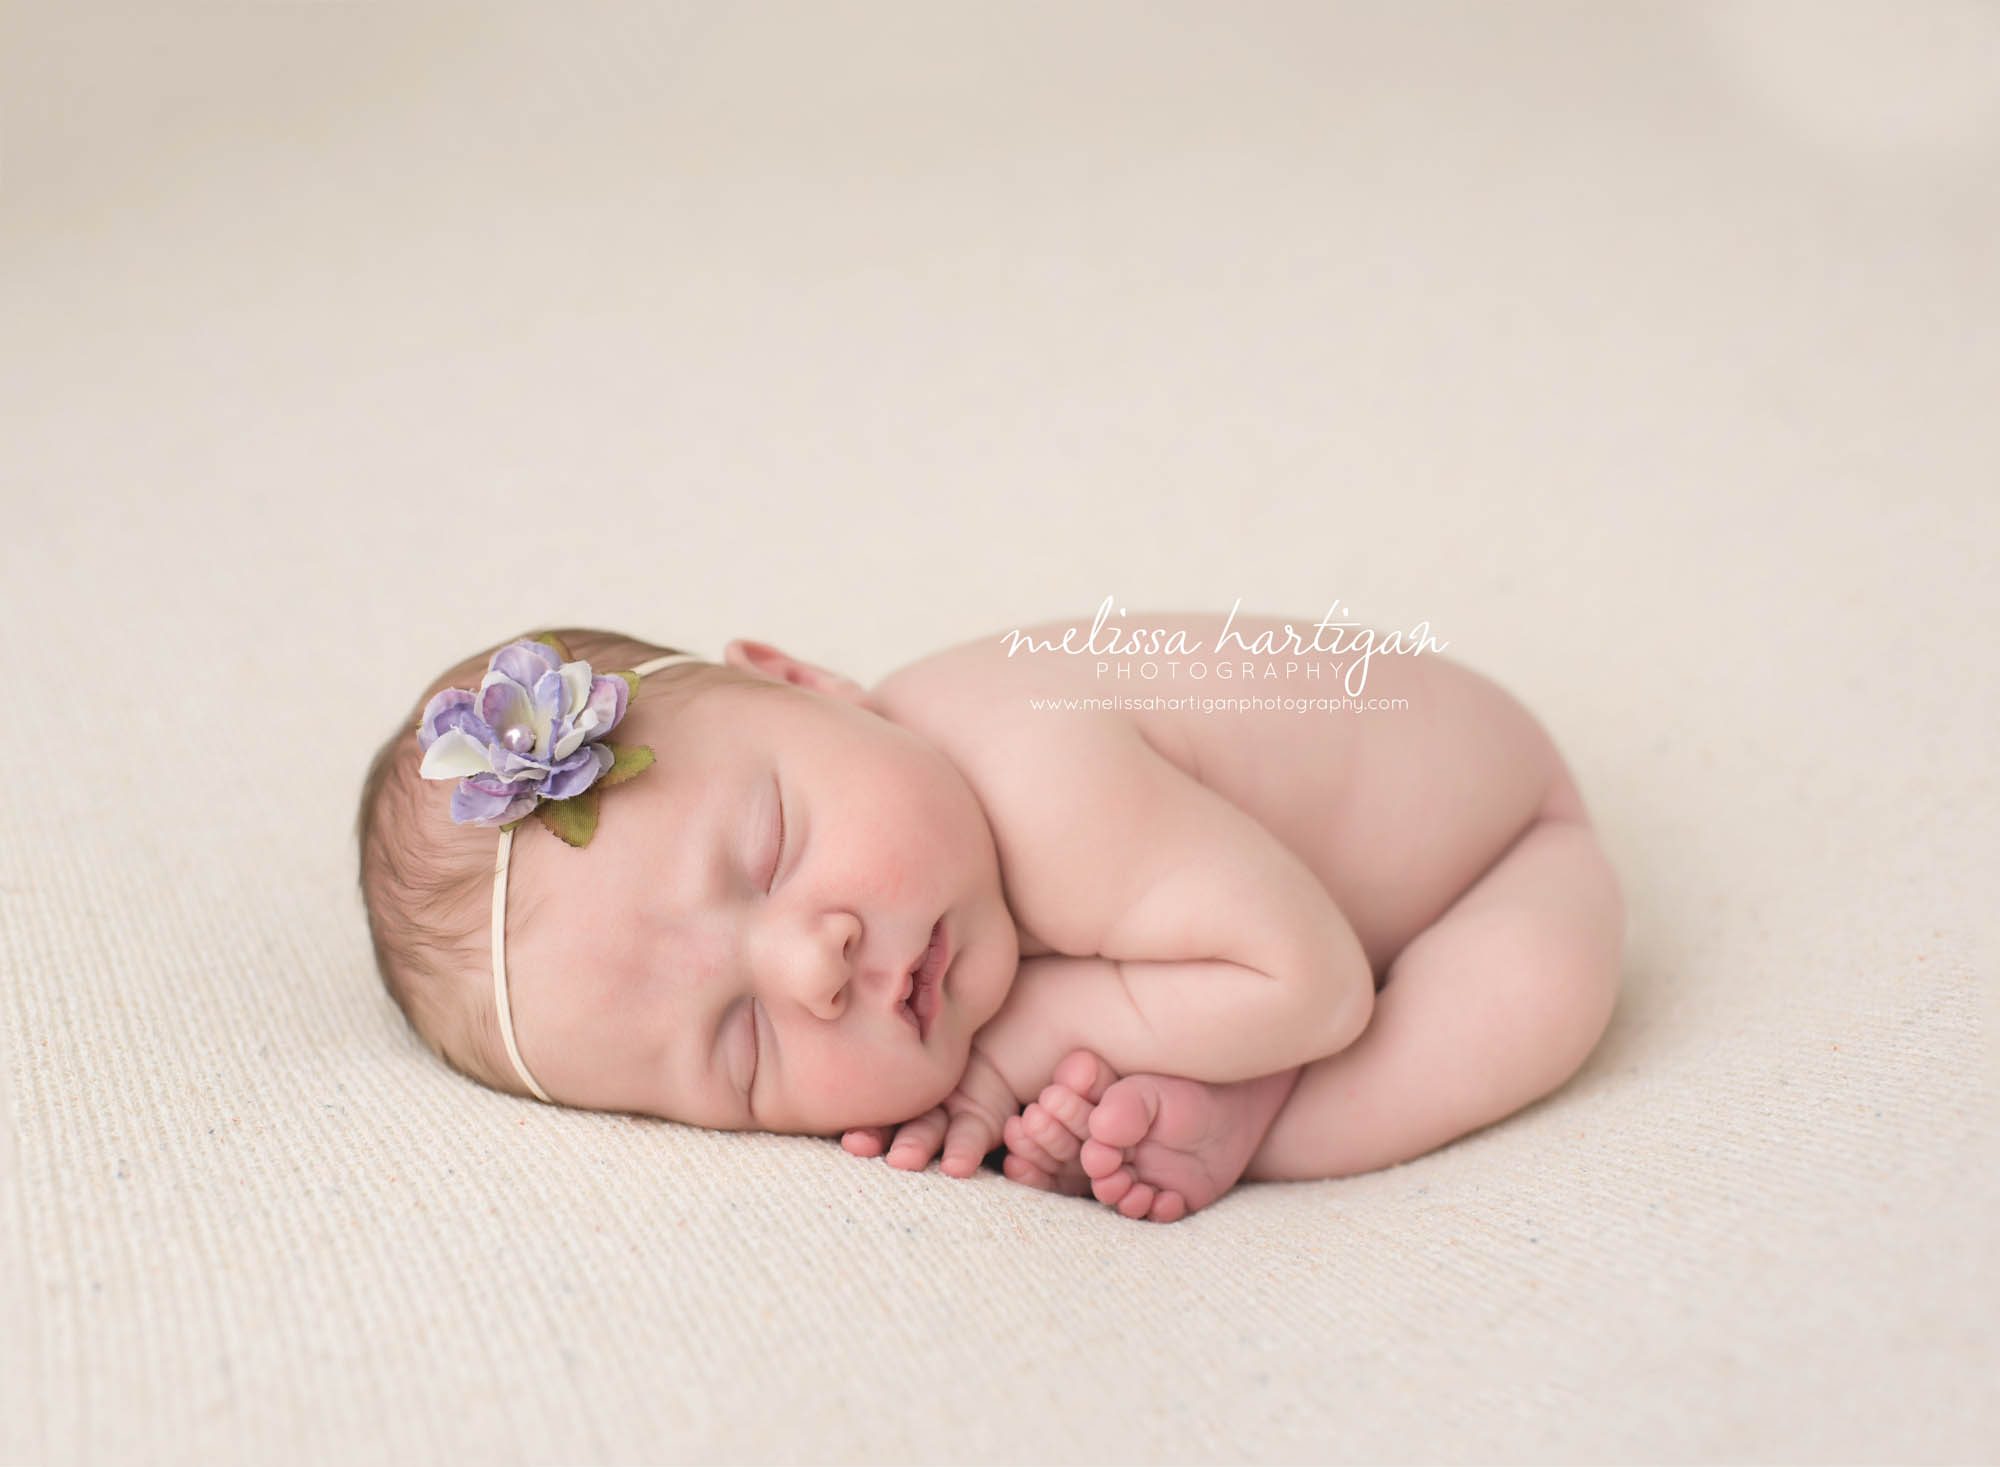 Melissa Hartigan Photography Connecticut Newborn Photographer Coventry Ct Middlefield CT baby Fairfield county Baby girl purple flower headband on pale pink blanket sleeping head on hands CT newborn session